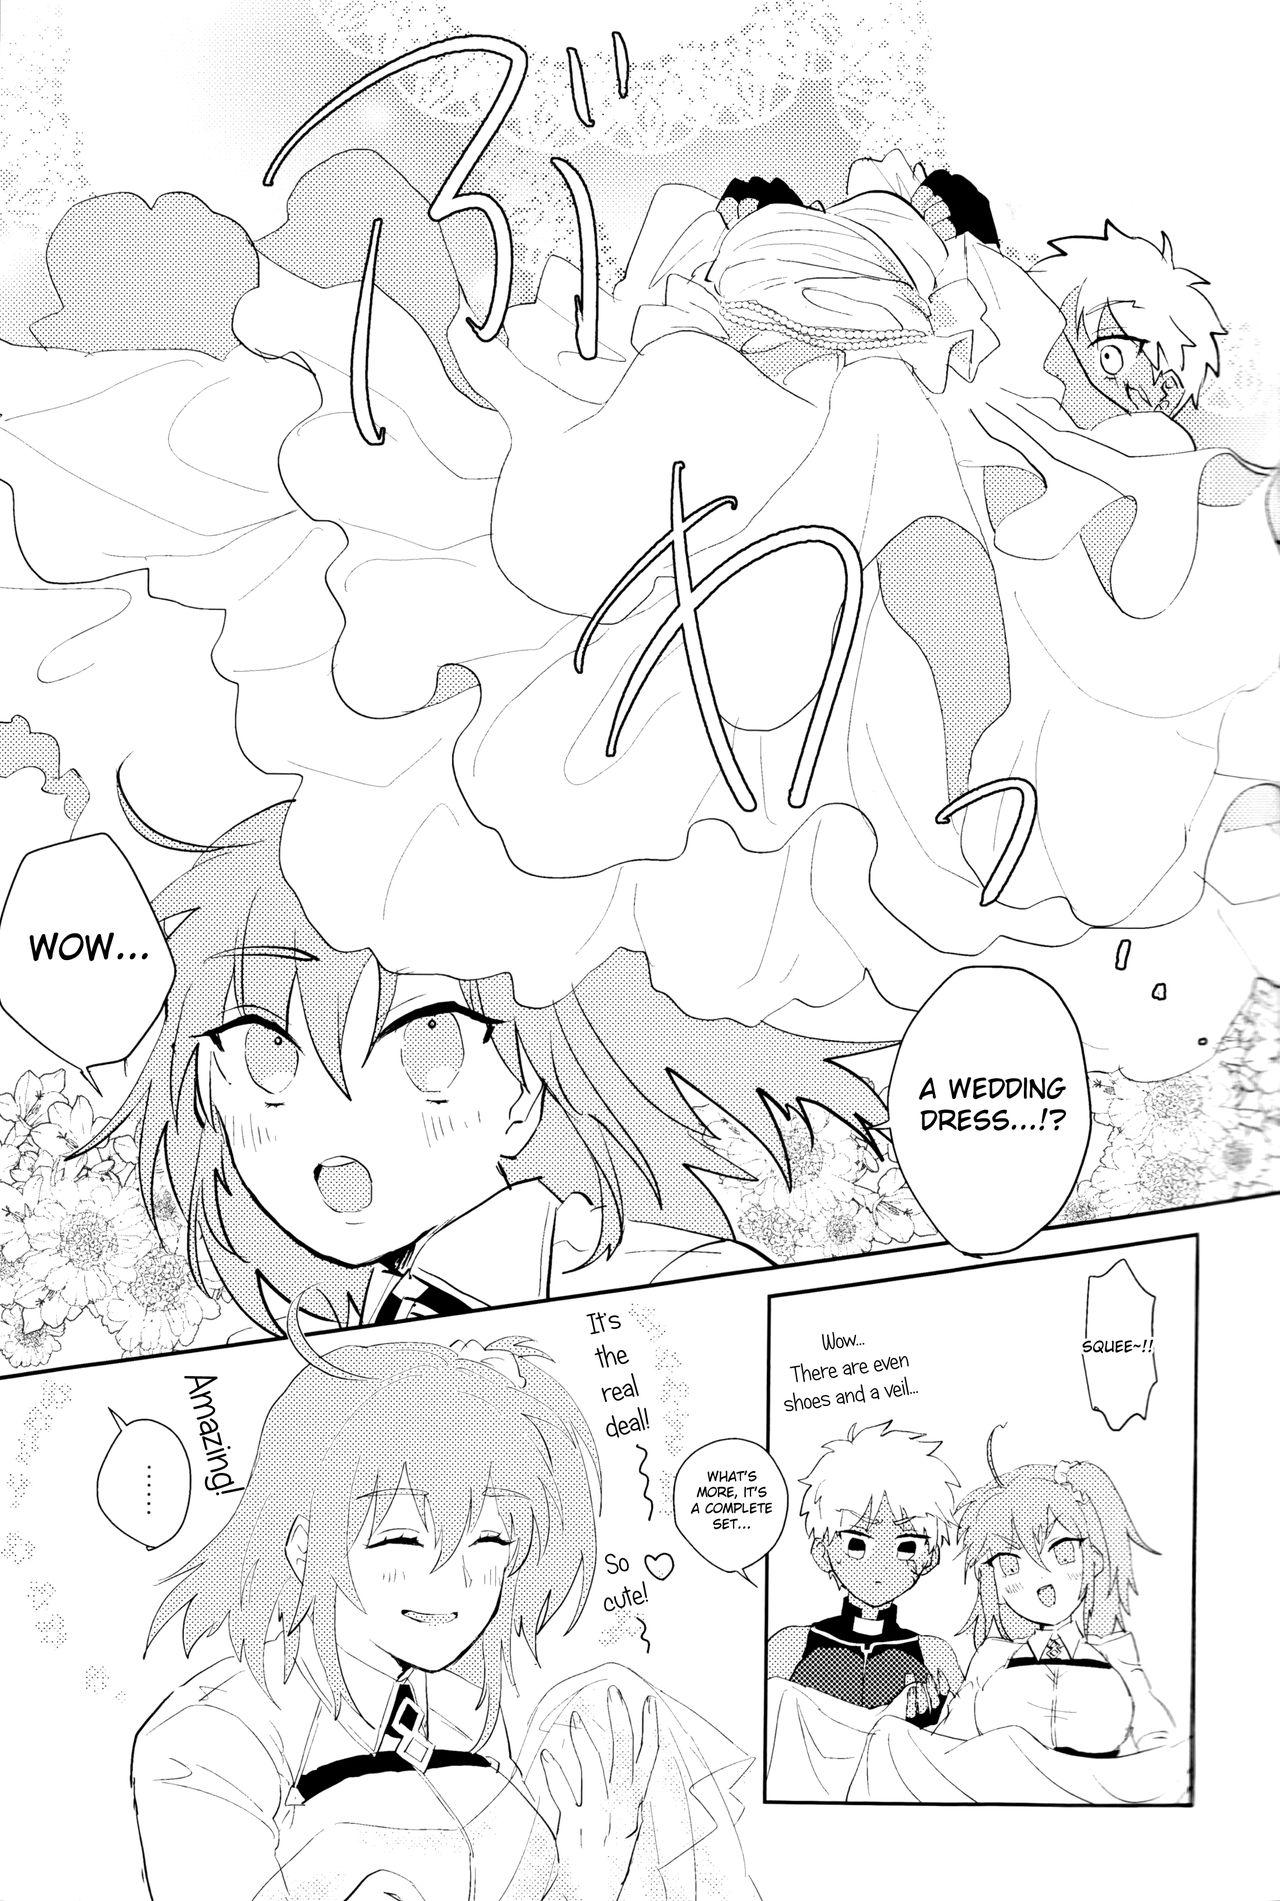 Girl Seventh Heavens Story - Fate grand order Celebrity Porn - Page 6